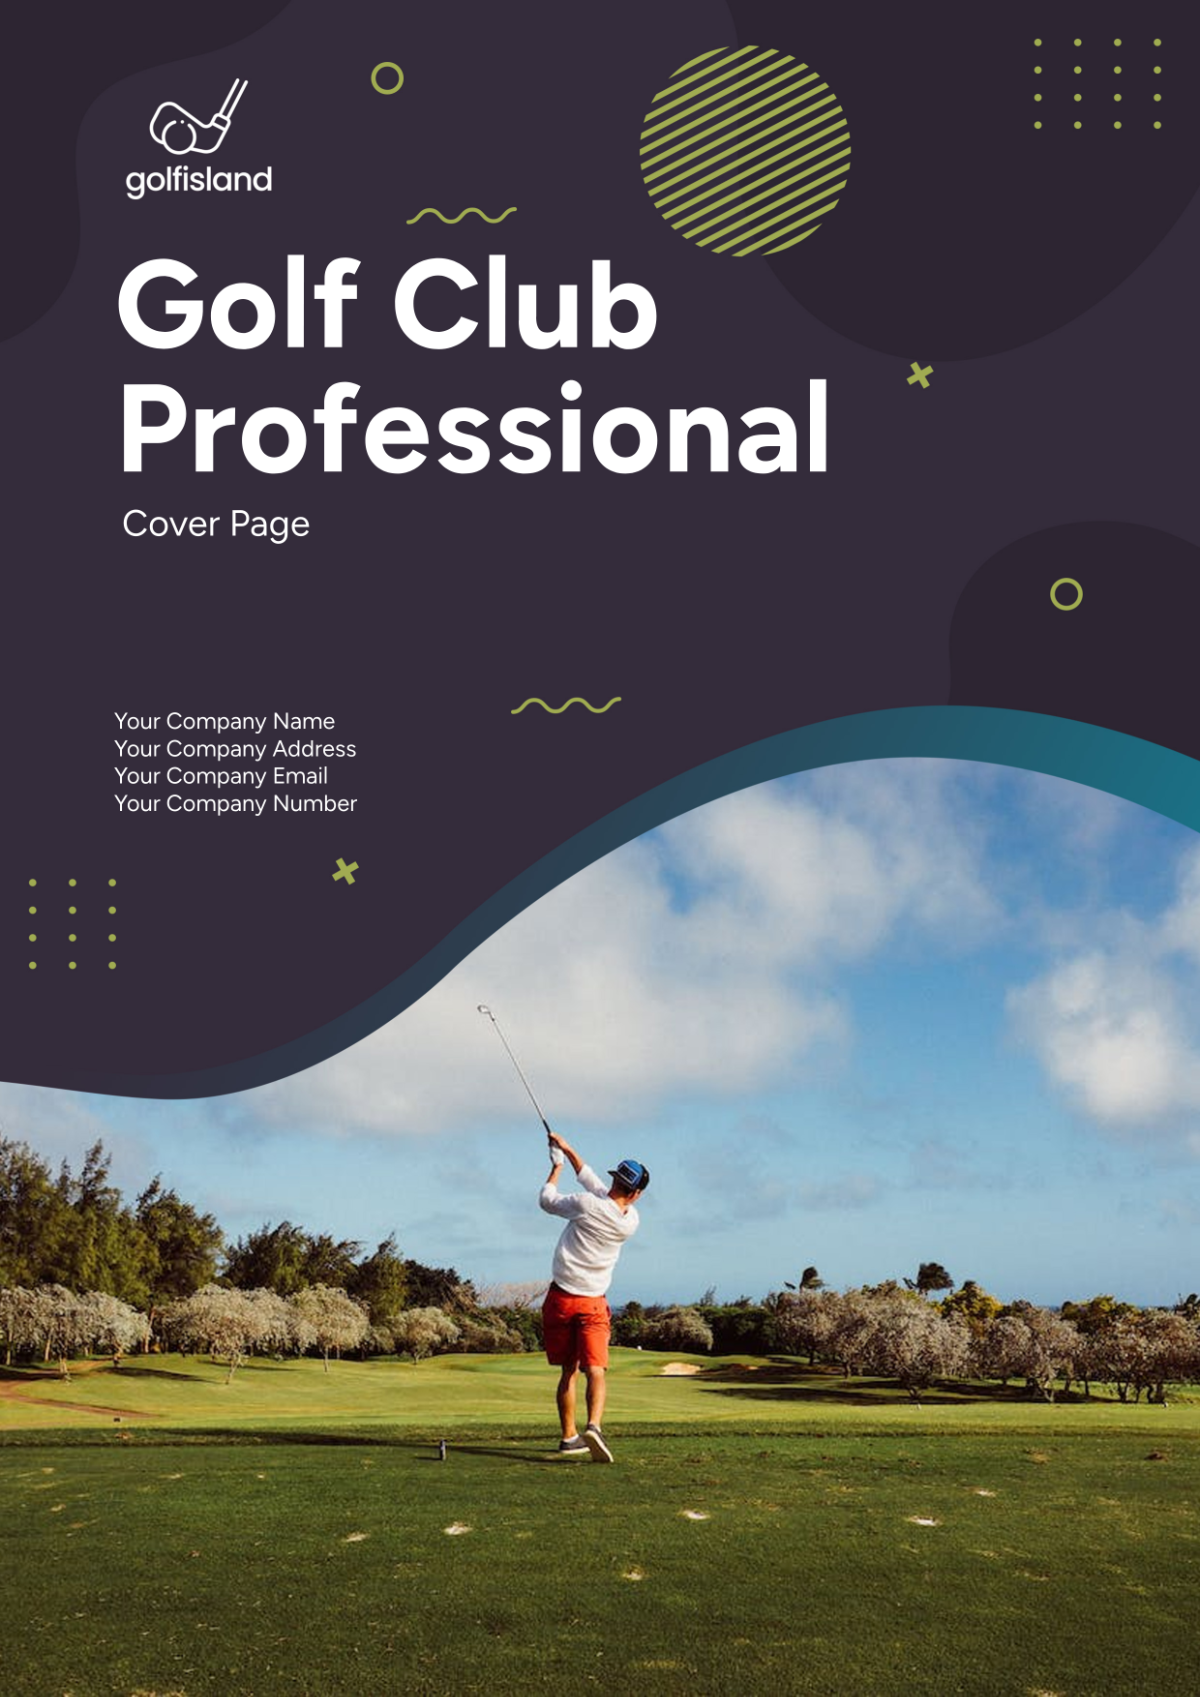 Golf Club Professional Cover Page